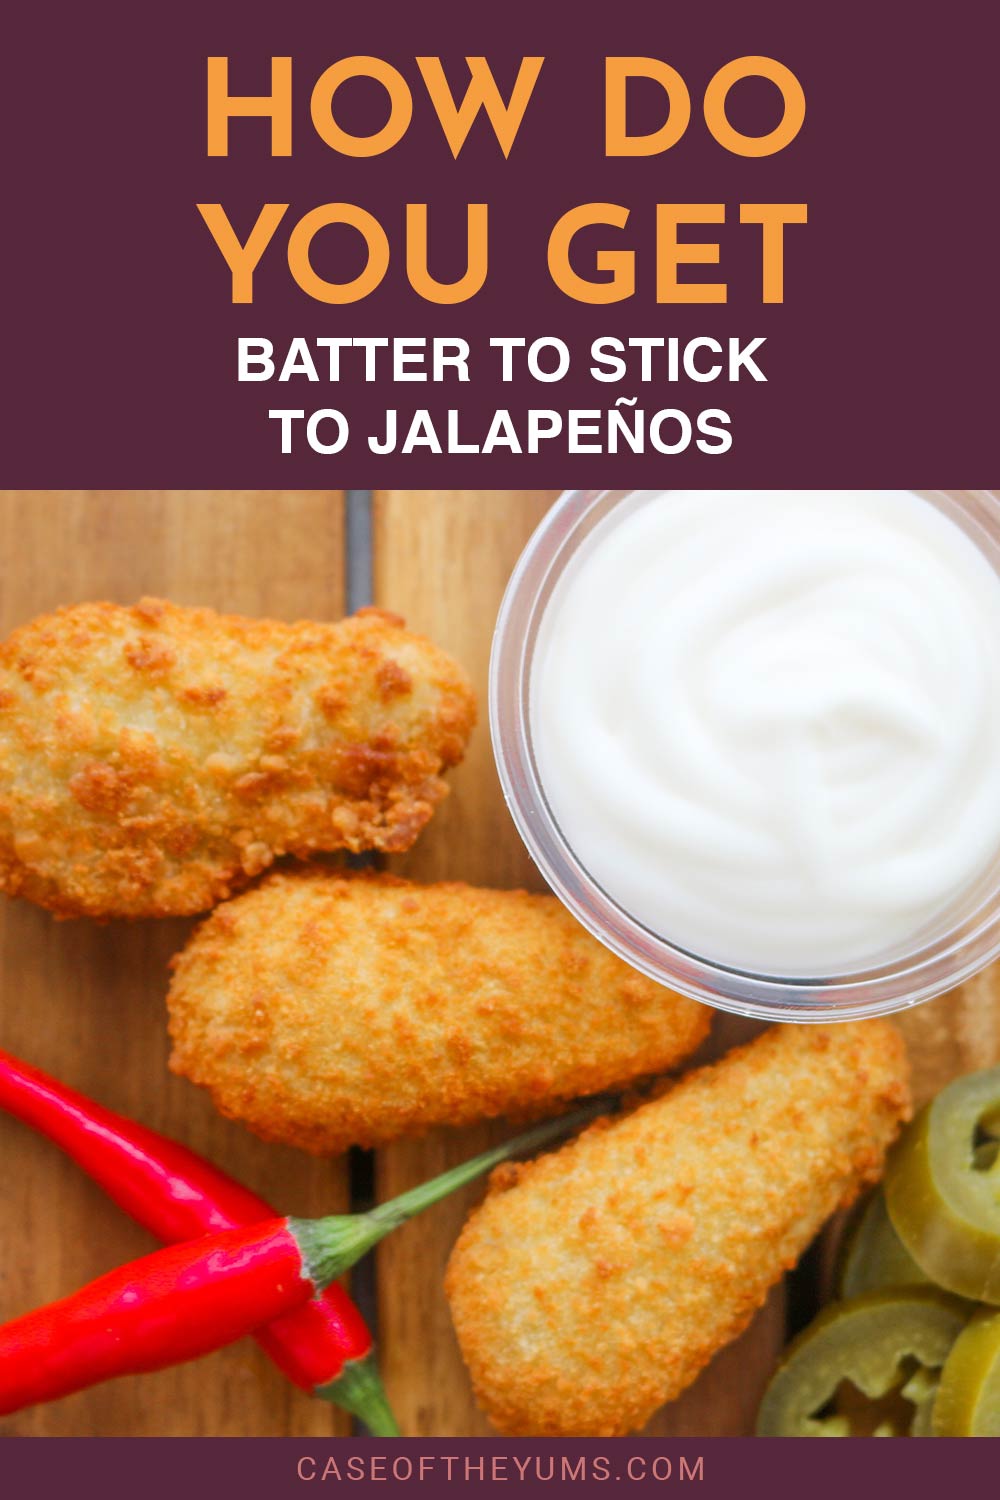 jalapeno poppers with a cup of garlic sauce and red chilli beside - How Do You Get Batter to Stick to Jalapeños?